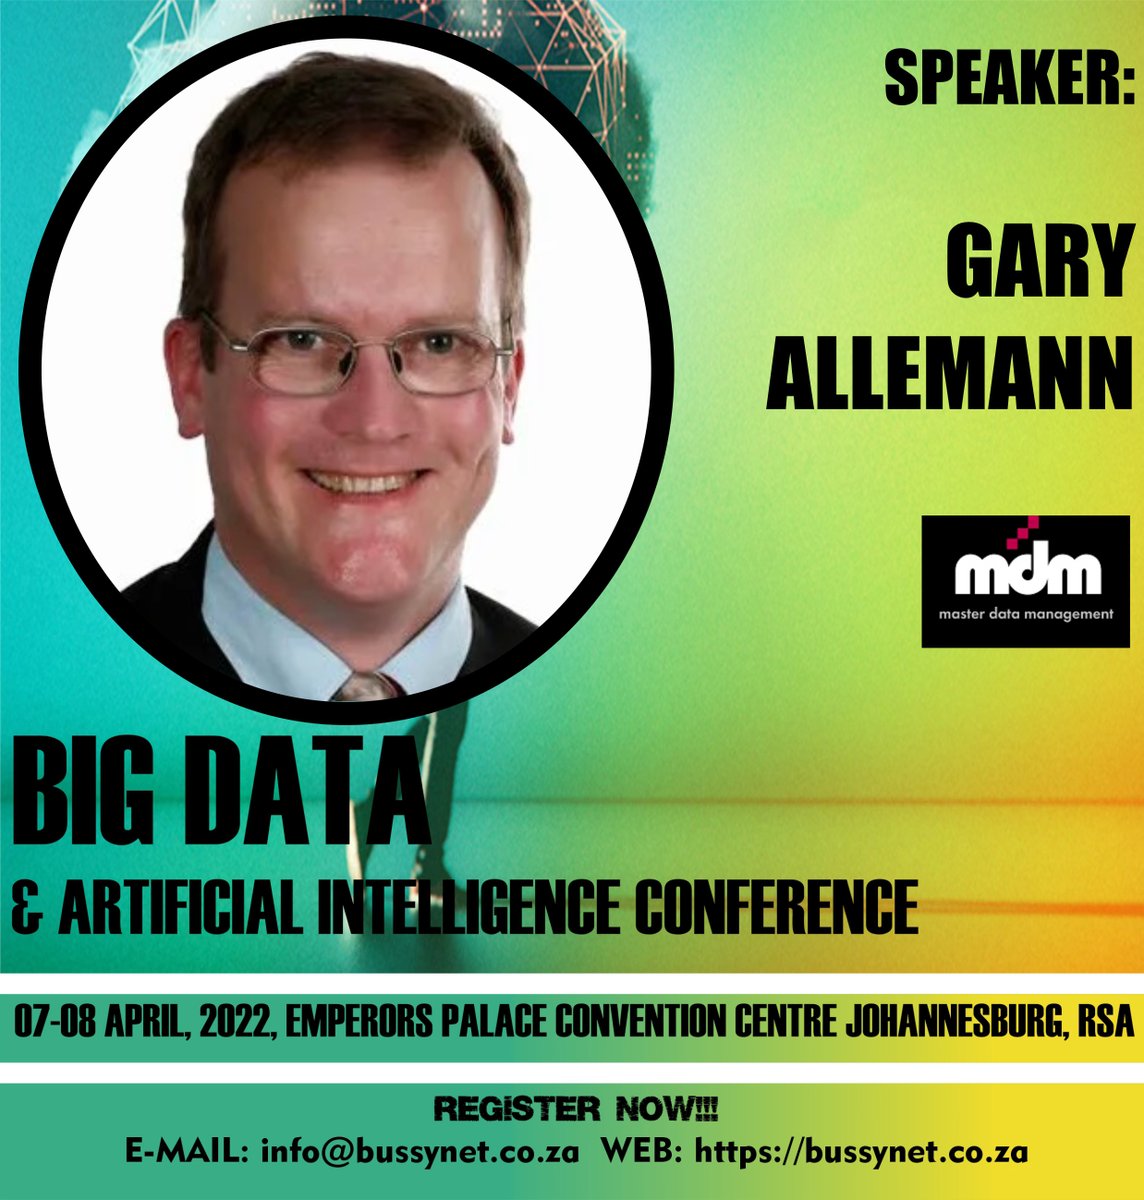 Does you data strategy work for your business? 

Join us for tips on delivering an actionable data strategy at @bussynet Big Data and #AI conference on the 7th and 8th of April at Emperor's Palace 
ow.ly/WzK750IkBHK